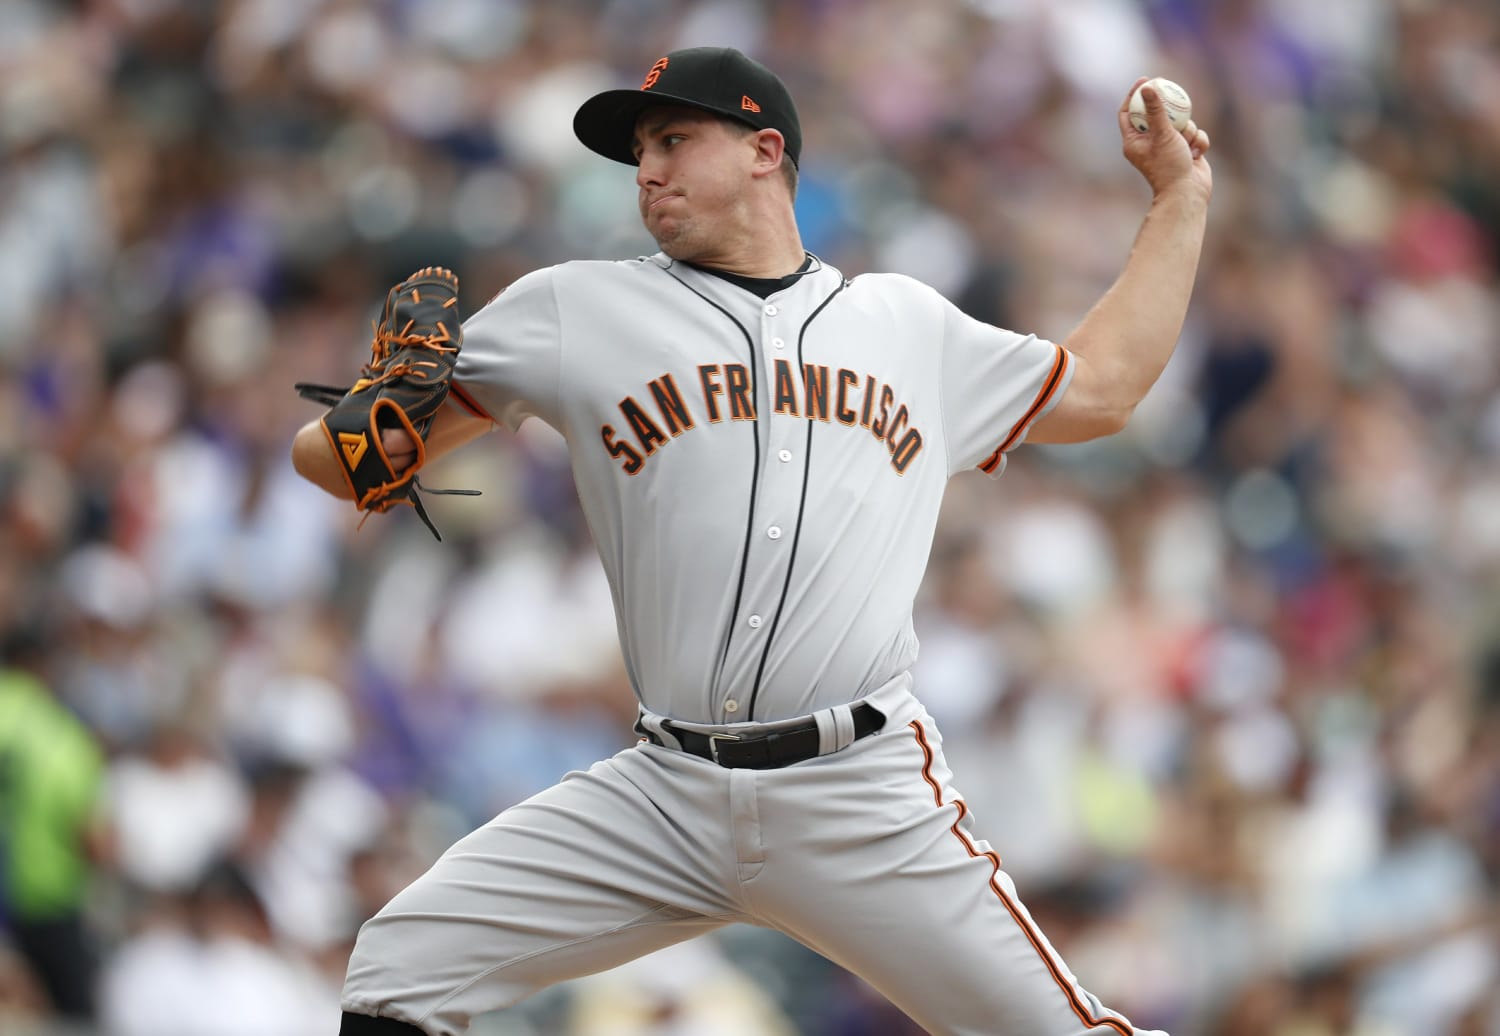 Cubs acquire Holland from Giants for lefty bullpen option